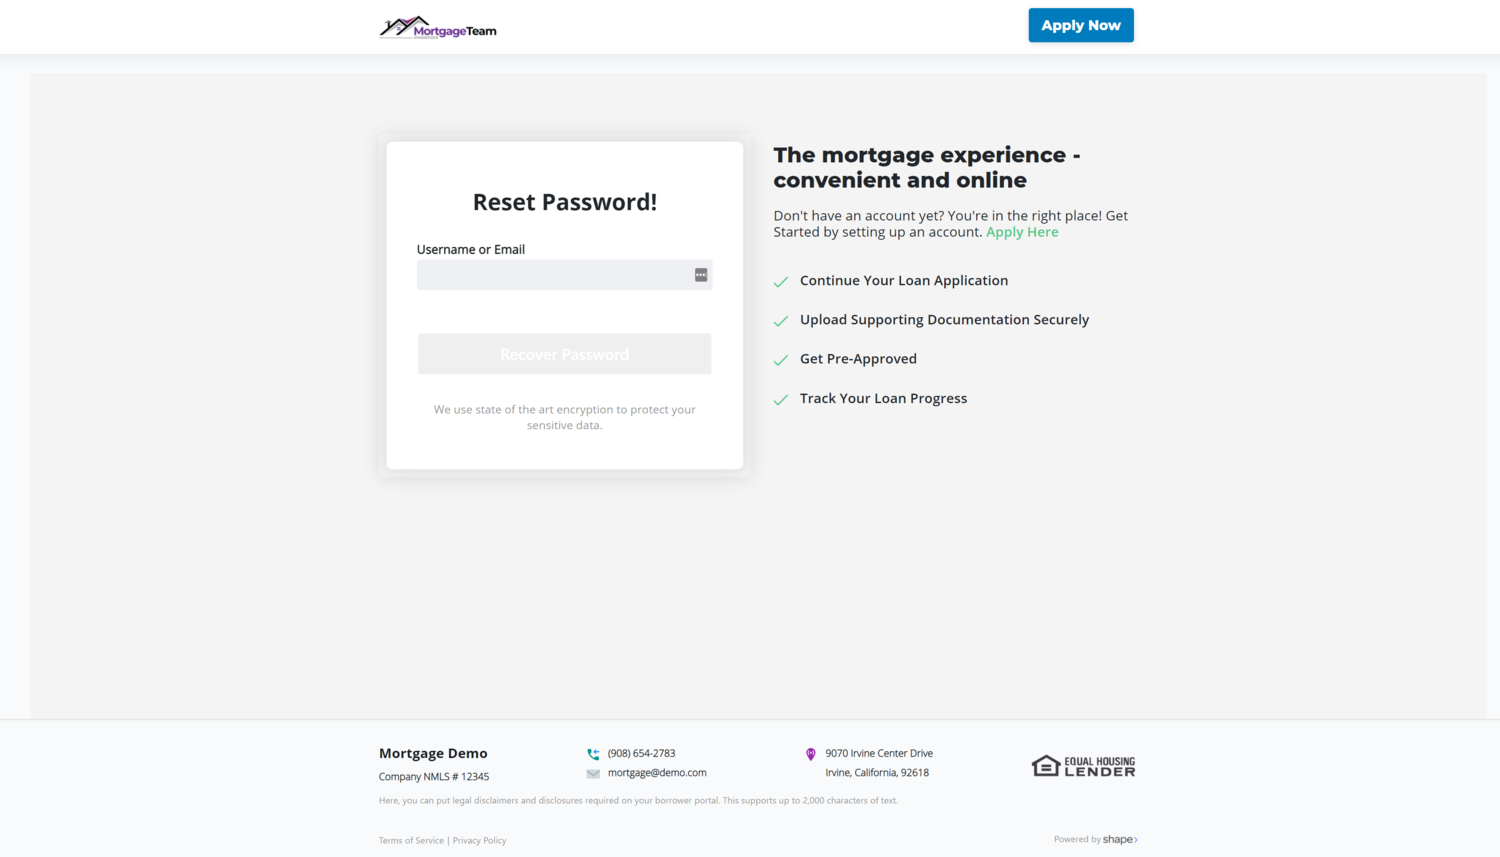 Resetting Passwords: Once the customer clicks on the “Forgot Password” they can enter in their username or email address and they will receive an email guiding them on how to reset their portal password.